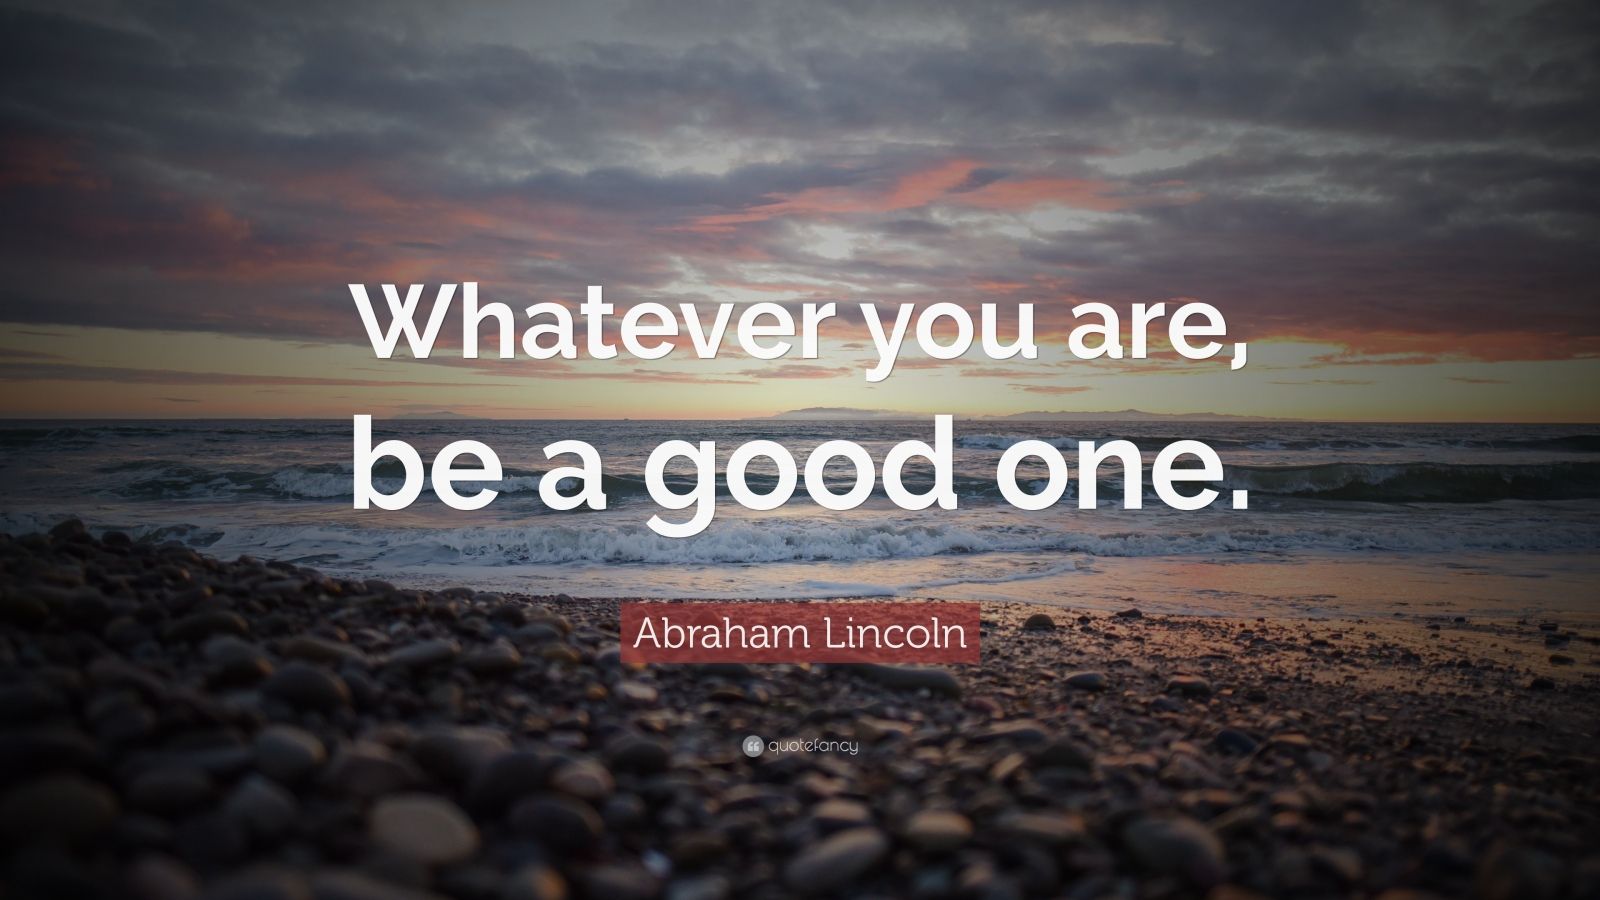 Abraham Lincoln Quote: “Whatever you are, be a good one.”